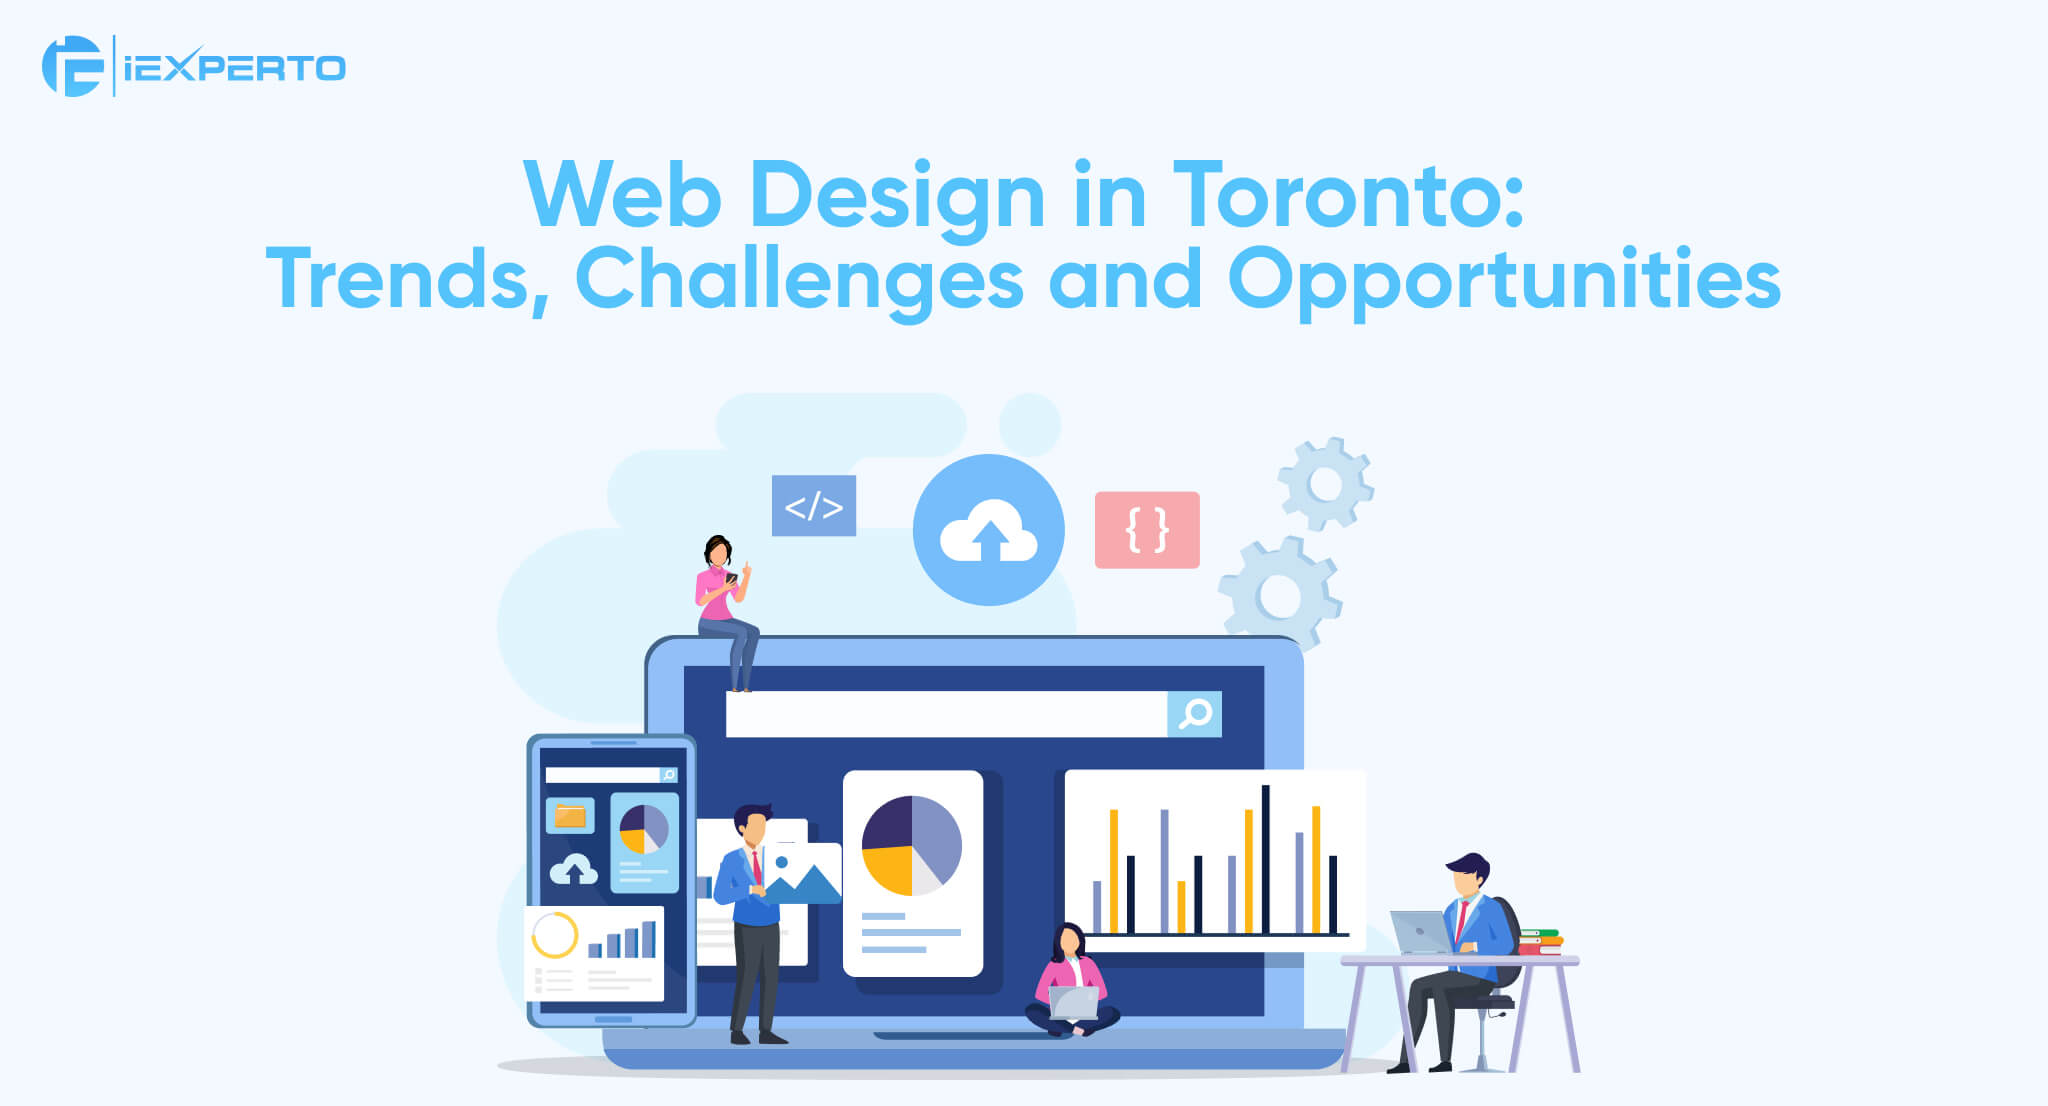 Web Design in Toronto: Trends, Challenges, and Opportunities